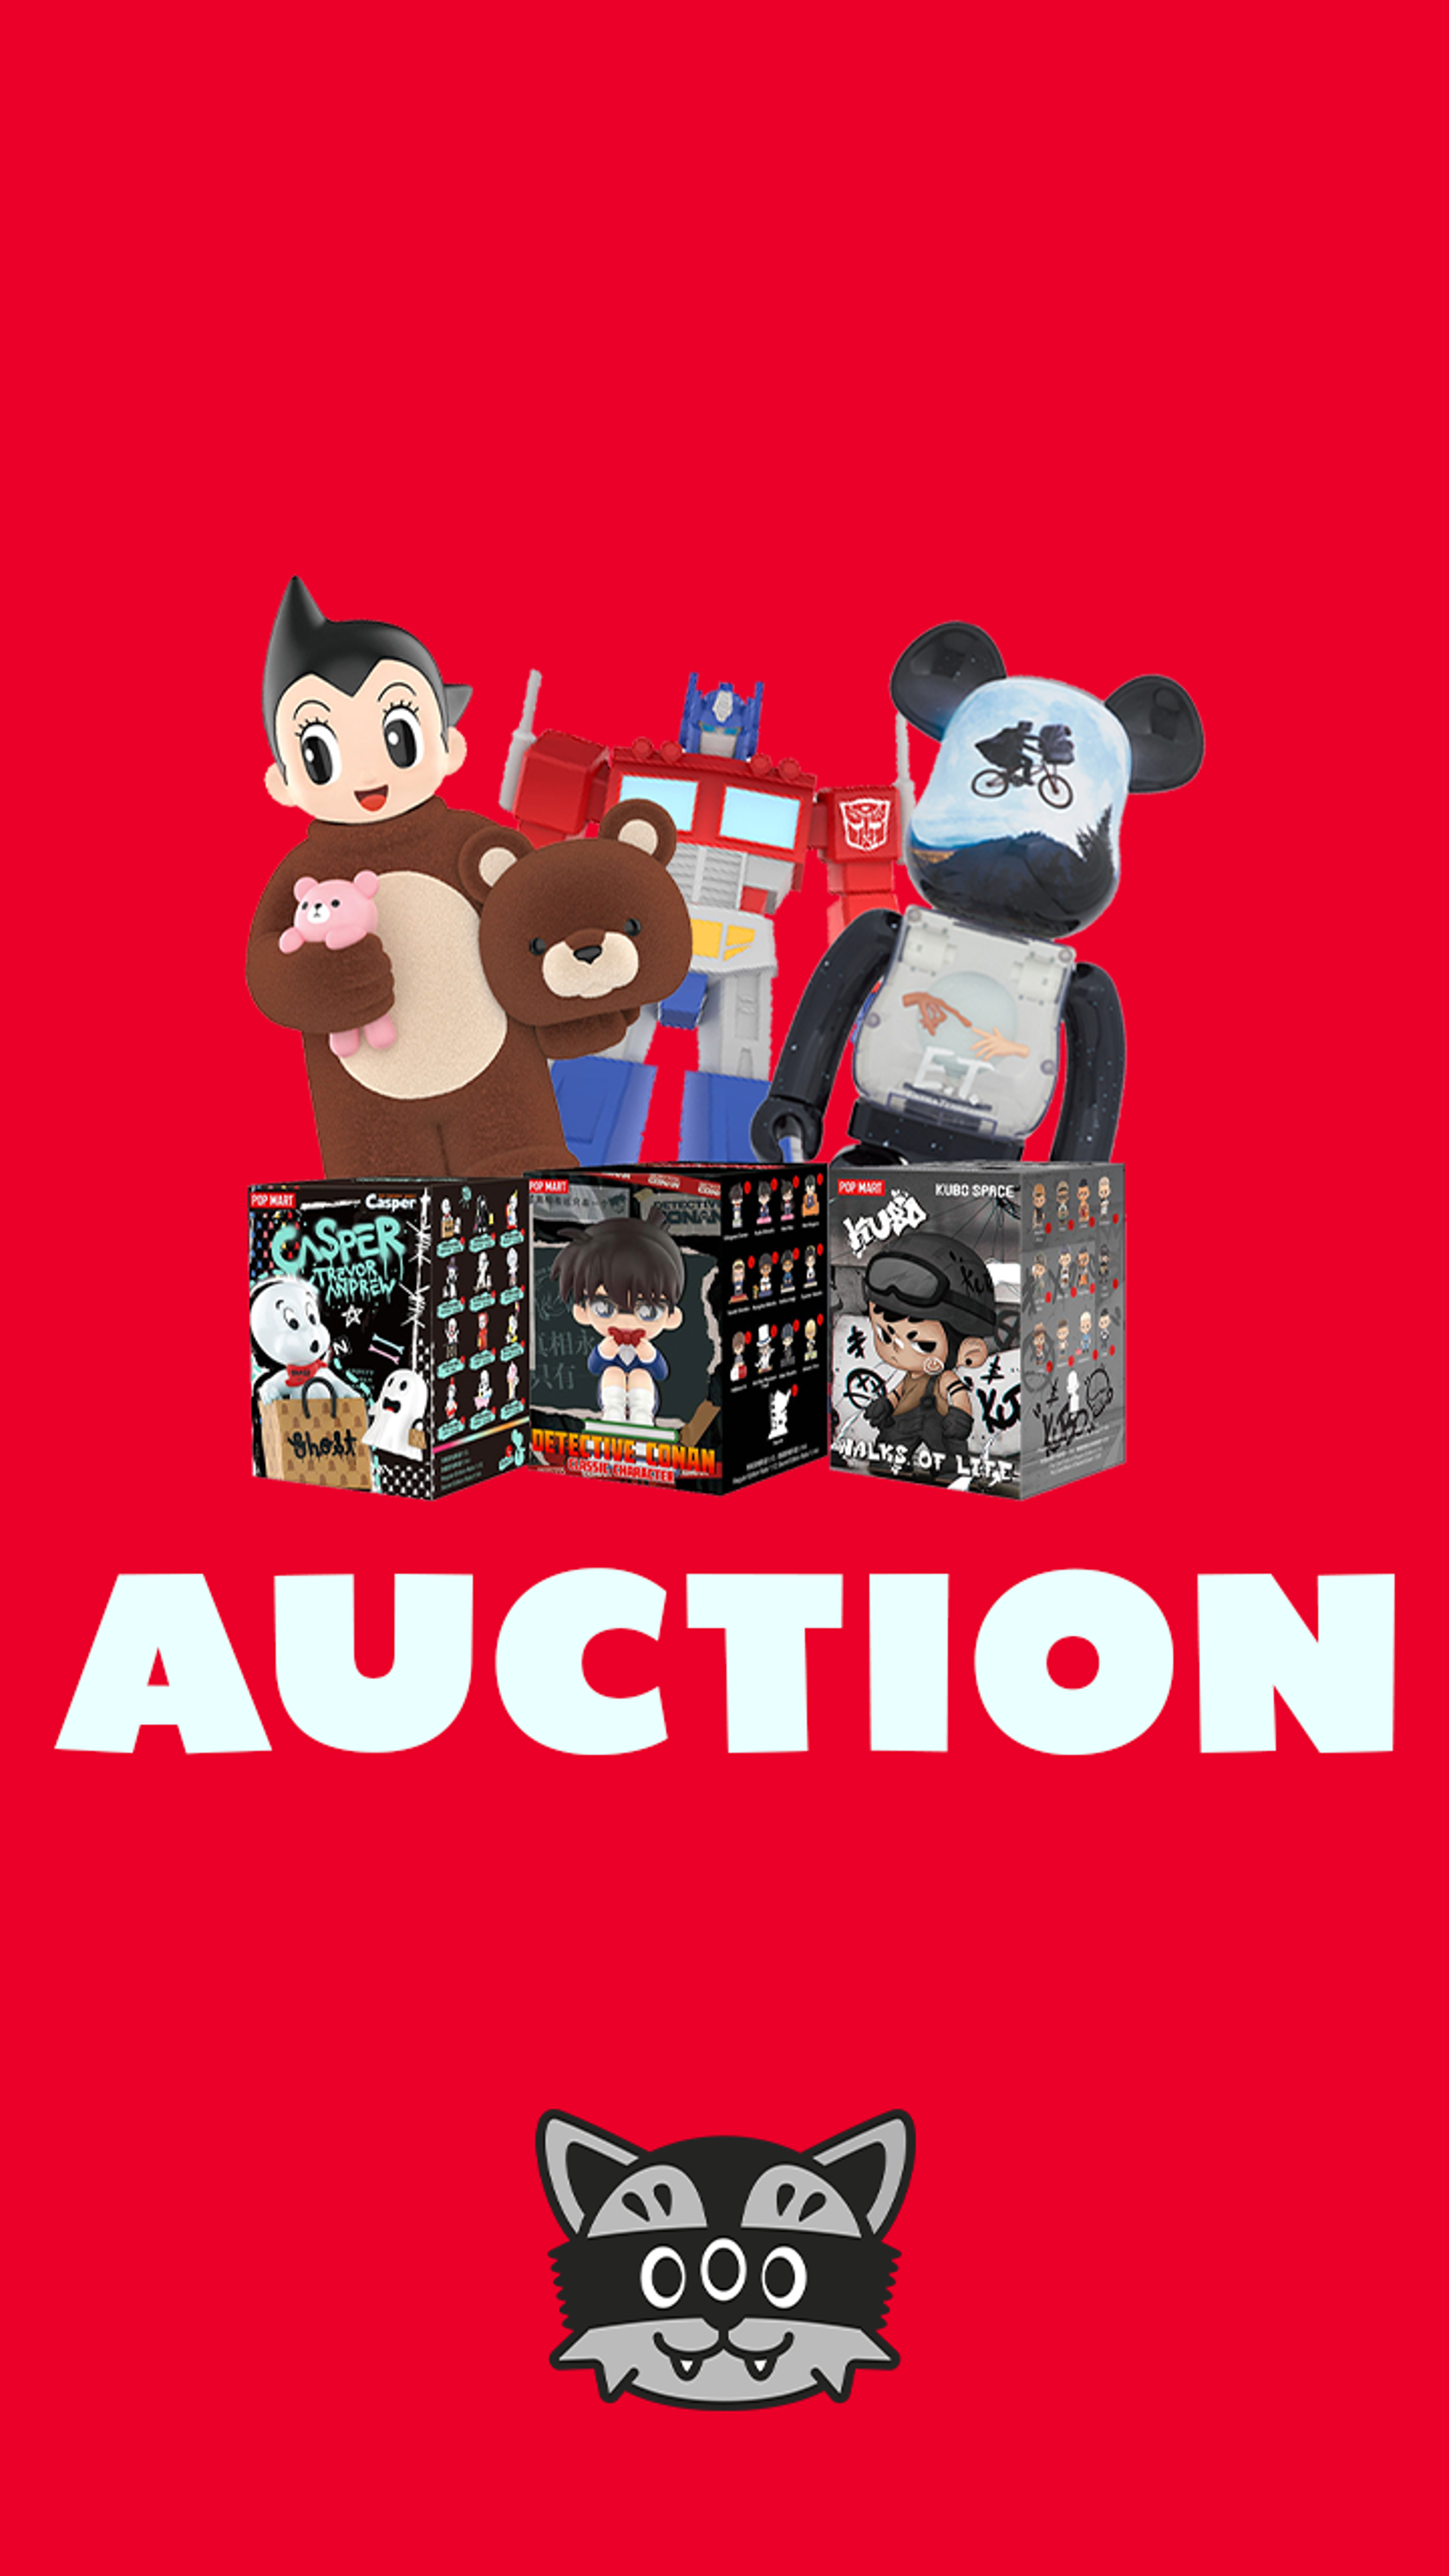 Preview image for the show titled "Mindzai Auction - Feb 23" at Today @ 6:00 PM